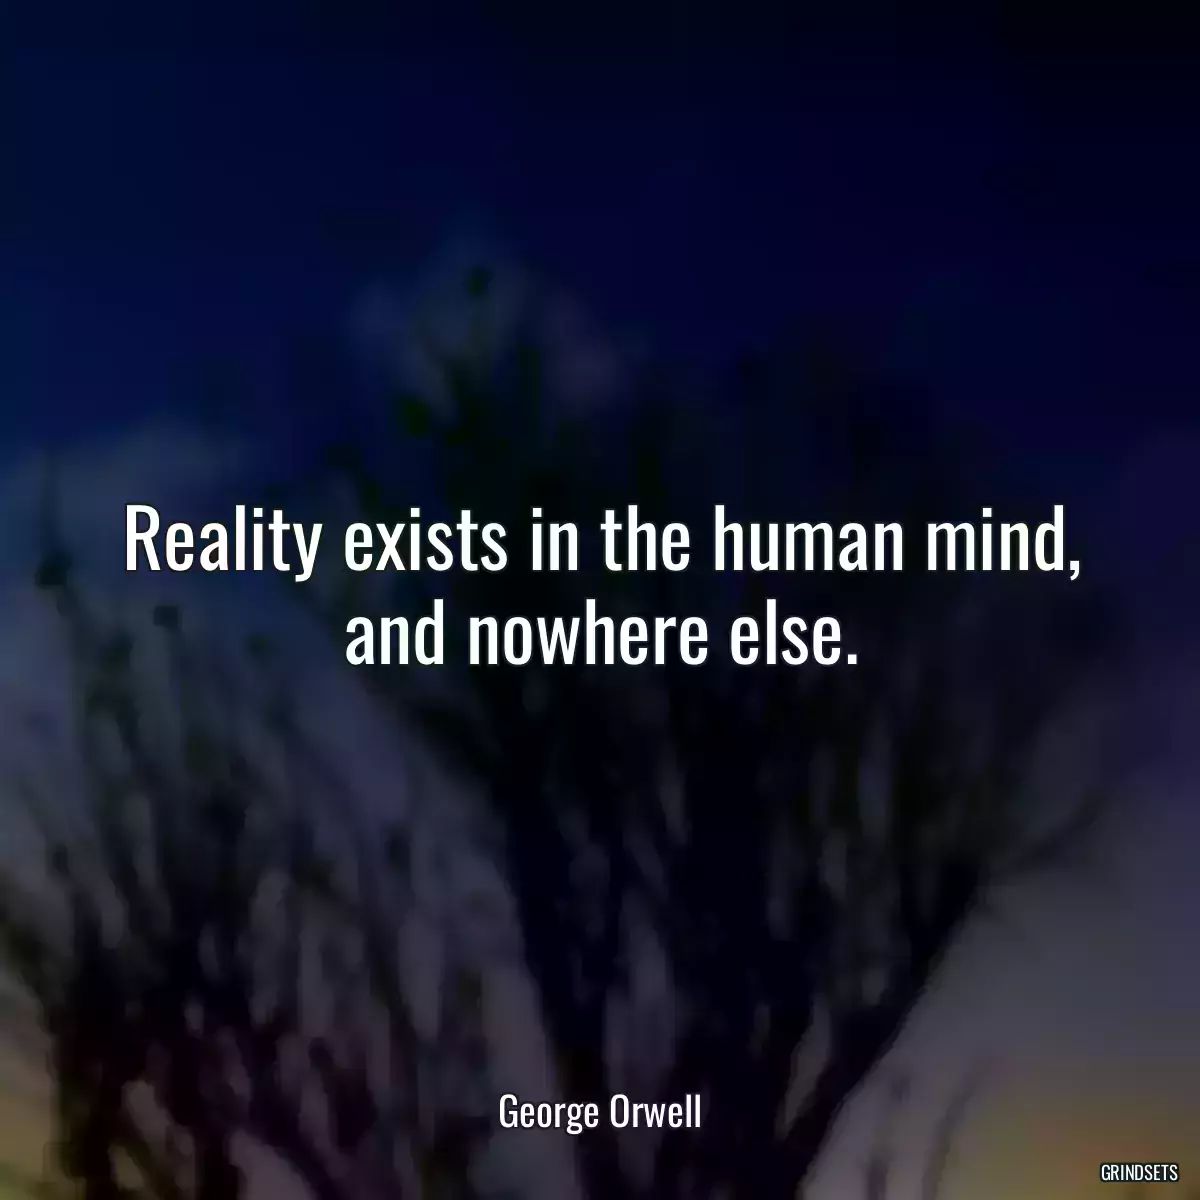 Reality exists in the human mind, and nowhere else.